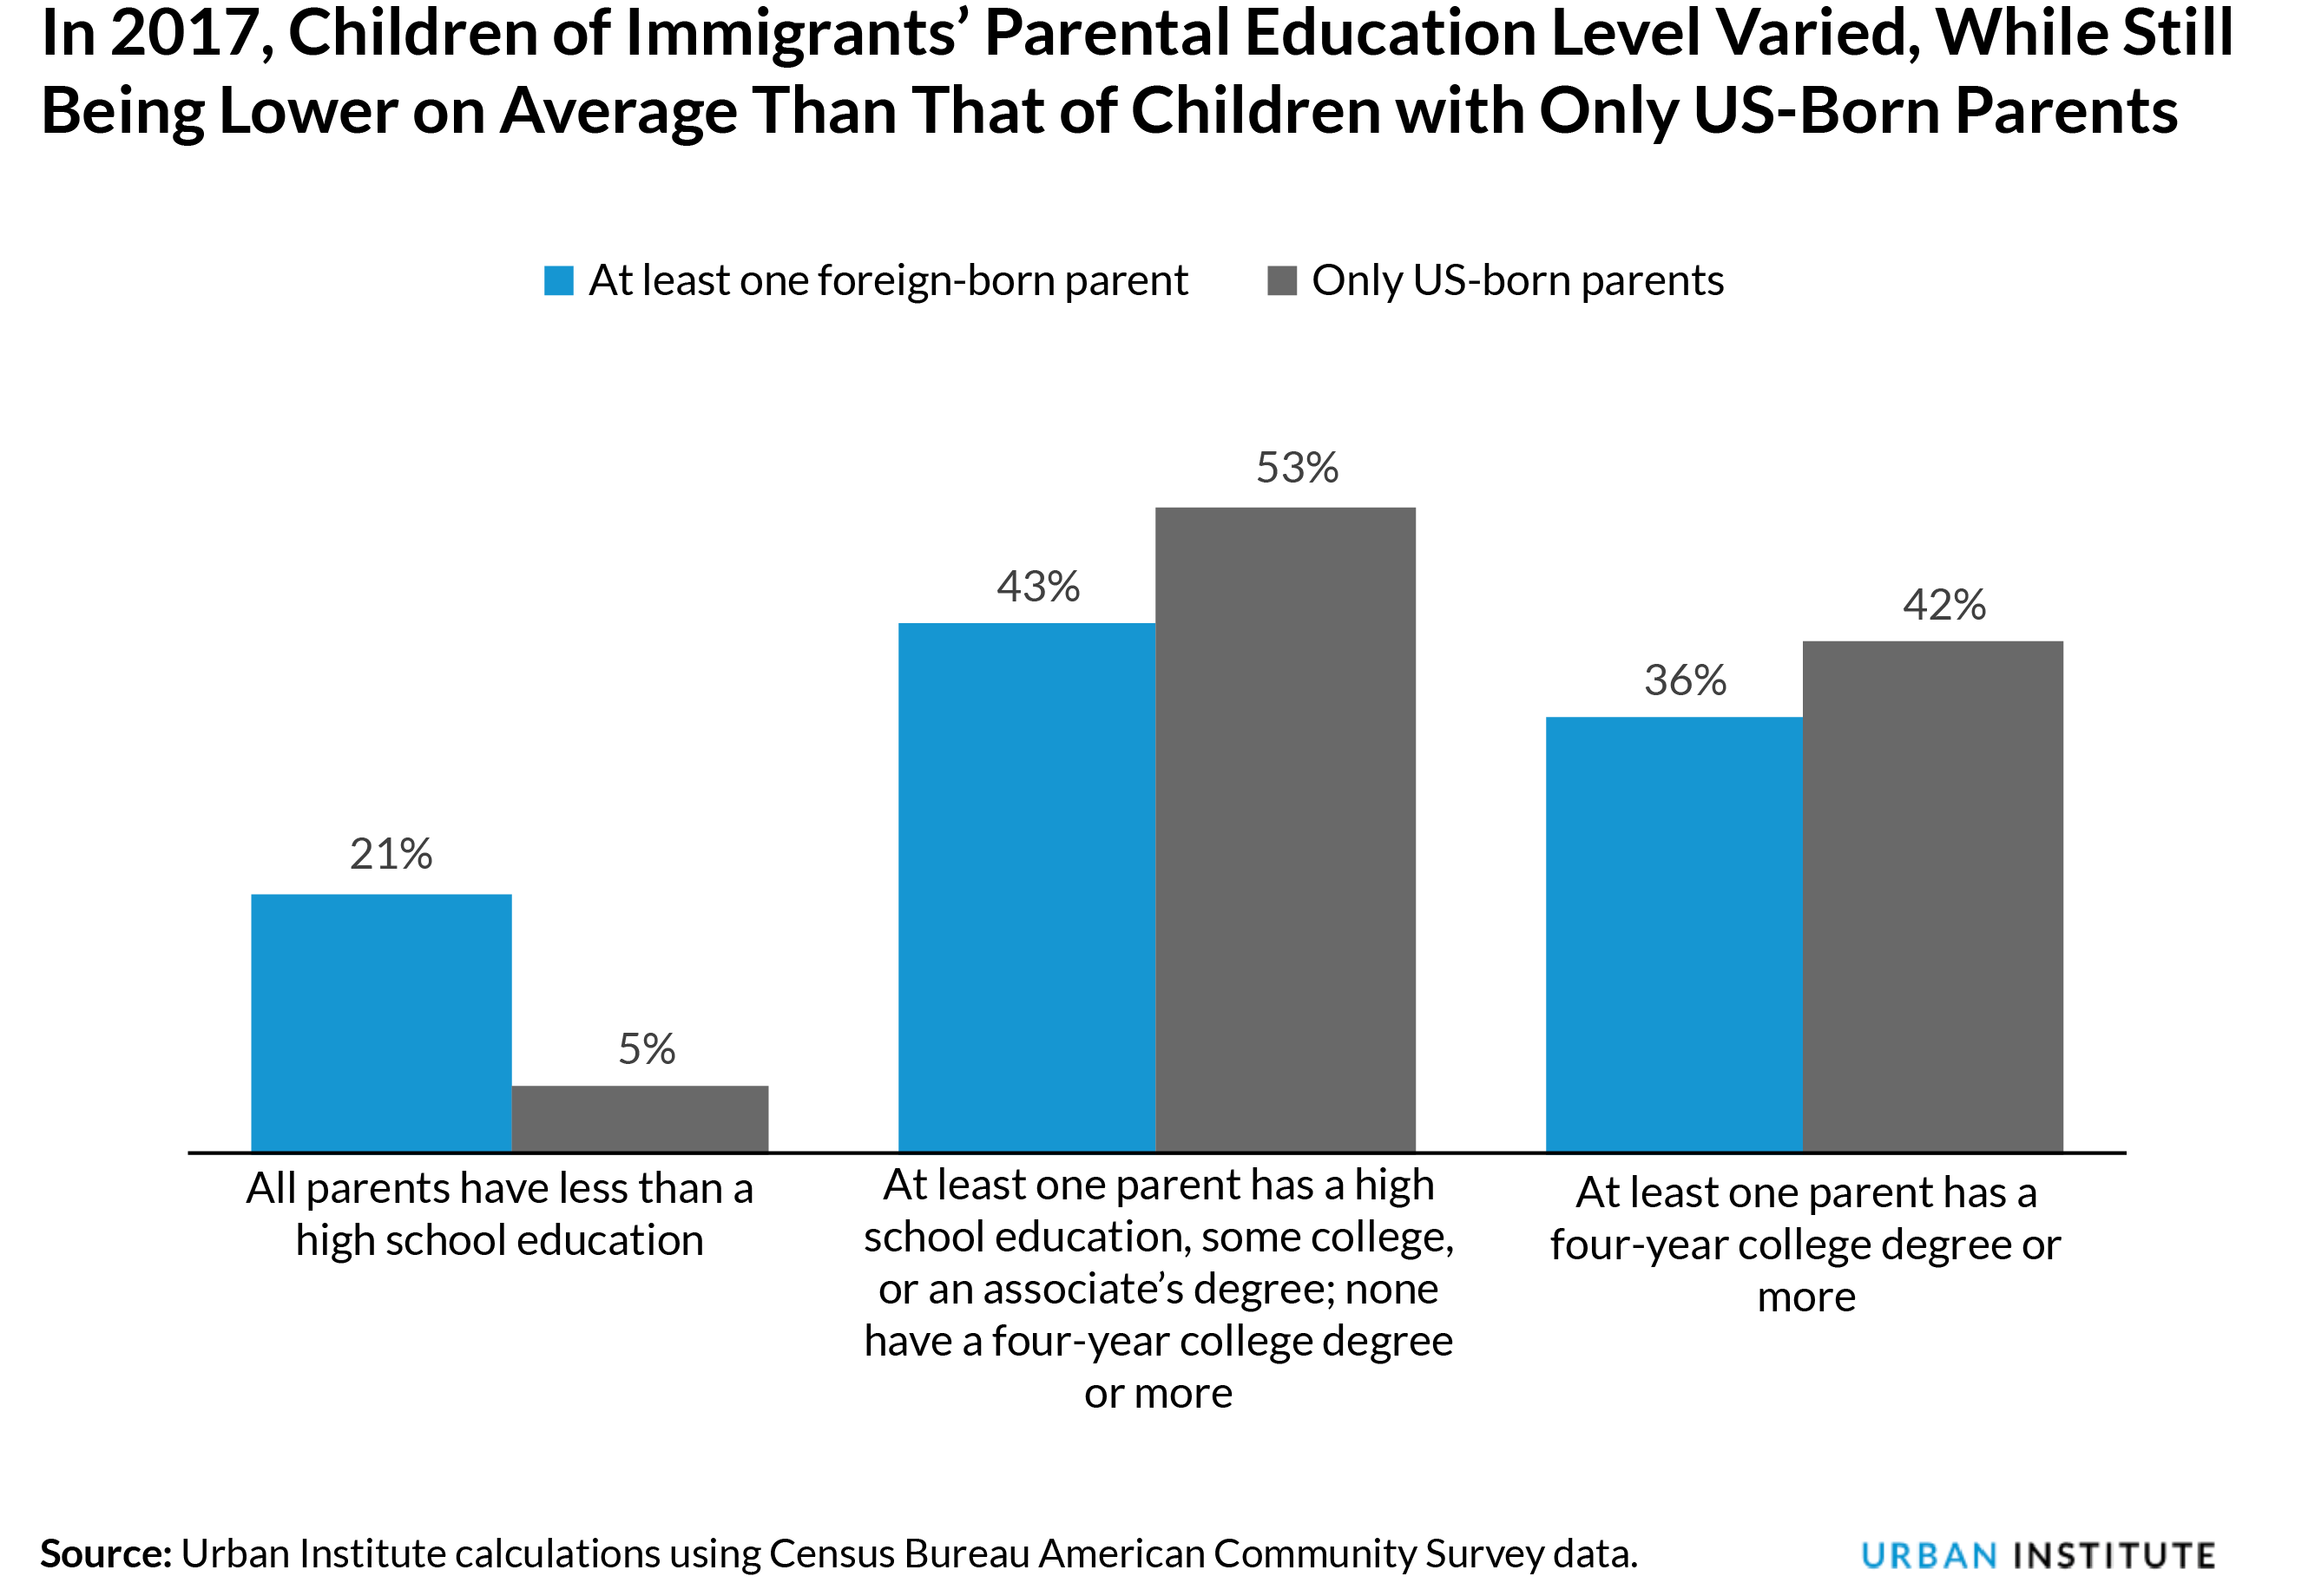 In 2017, Children of Immigrants' Parental Education Level Varied, While Still Being Lower on Average Than That of Children with Only US-Born Parents